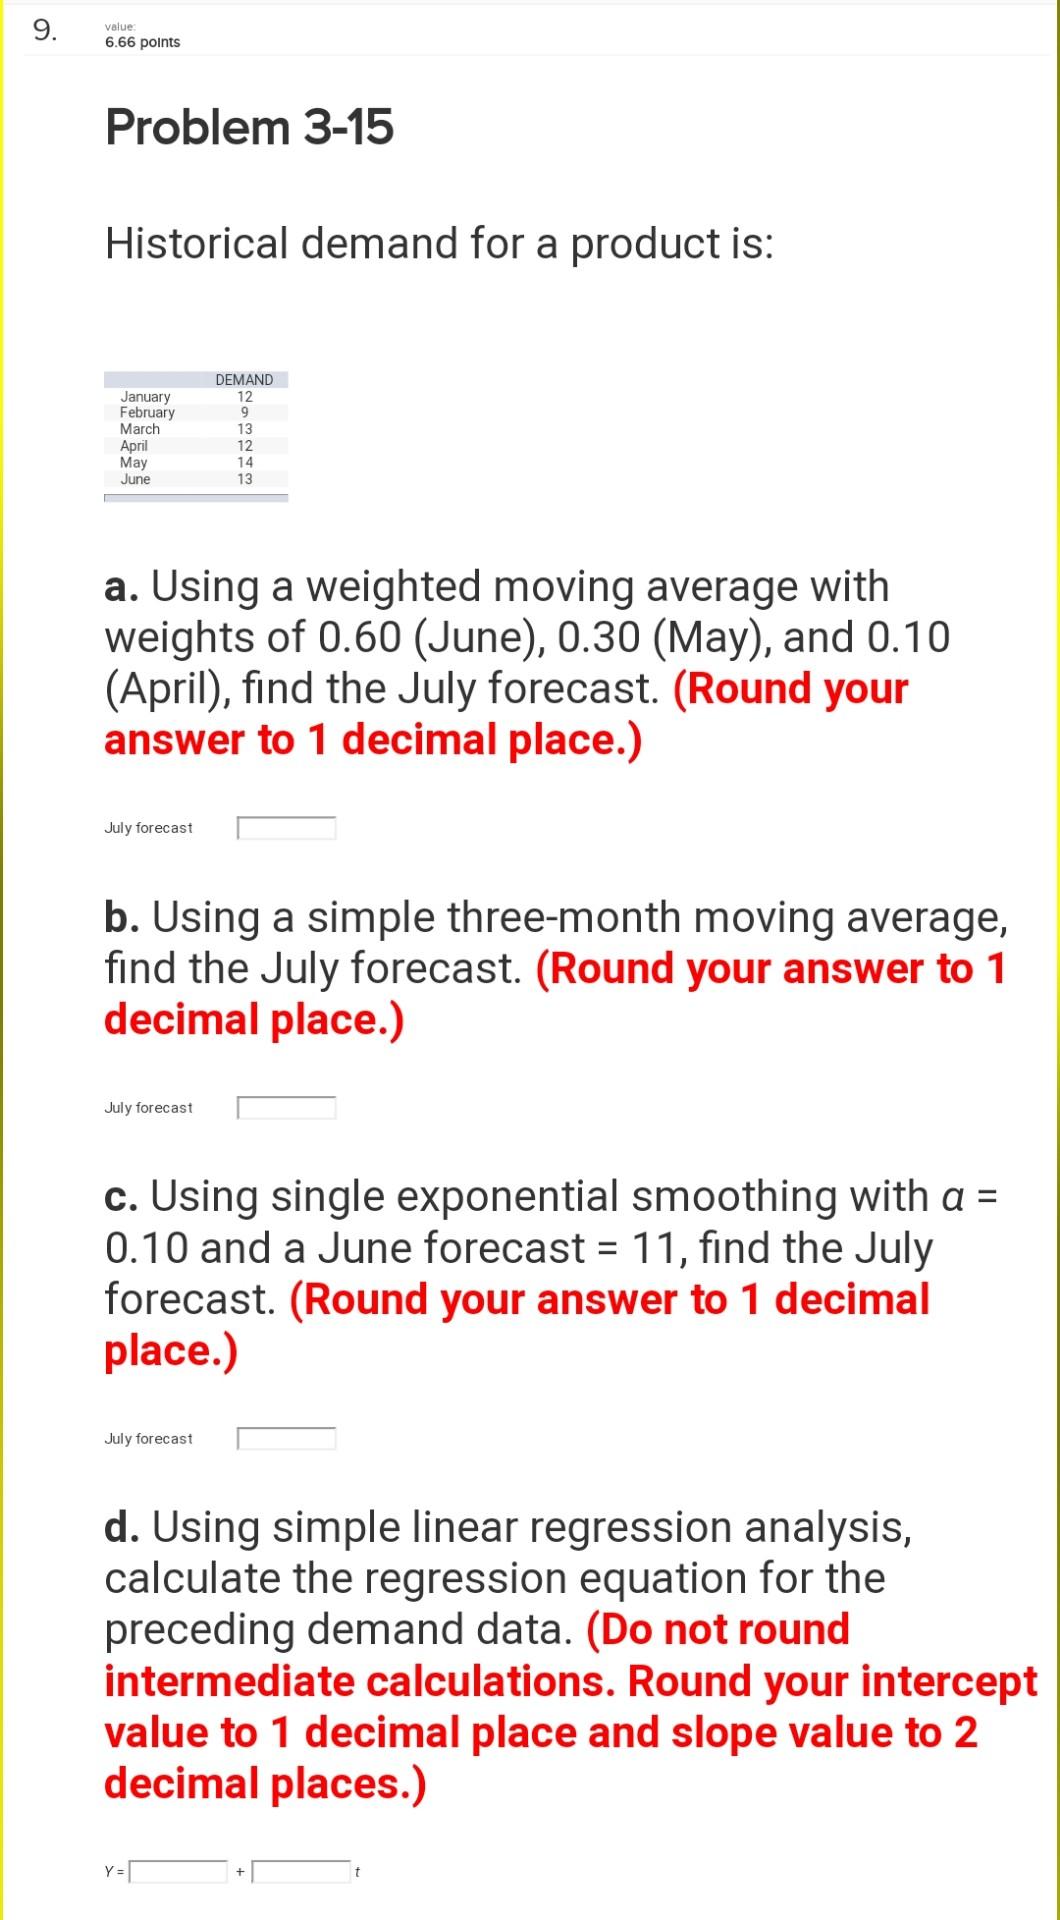 Answered: Date 01.04. 15.04. The weighted average…